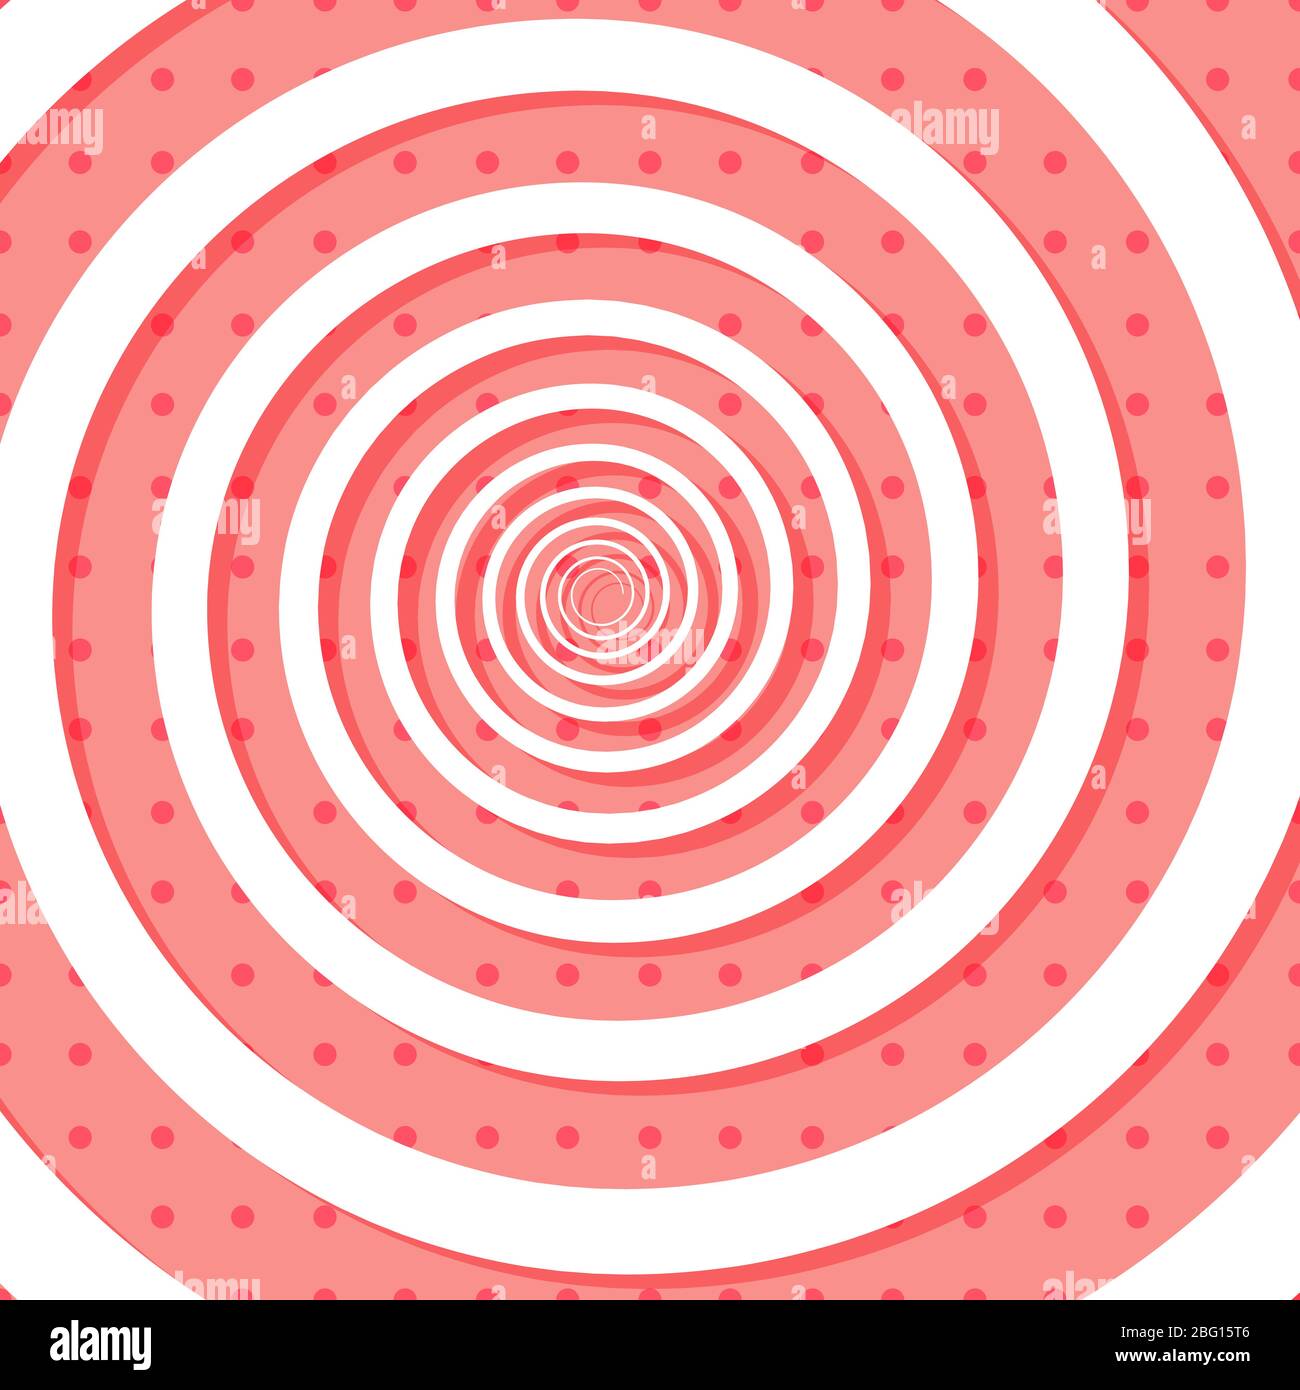 Colorful retro style spiral backround with polka dots backdrop. Spiral pattern graphic vector illustration Stock Vector